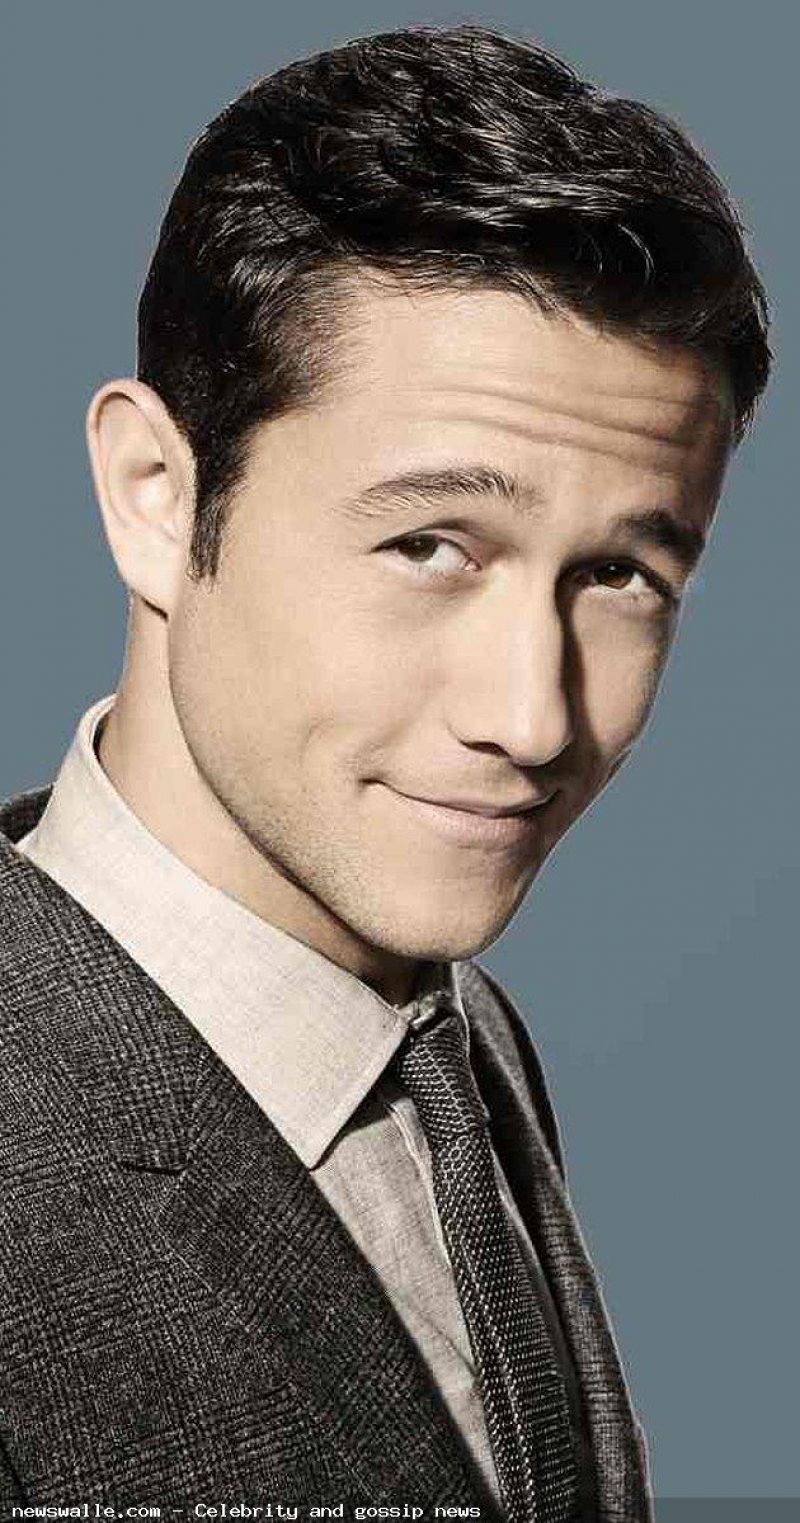 Joseph Gordon-Levitt-15 Celebrities Who Look Younger Than They Actually Are